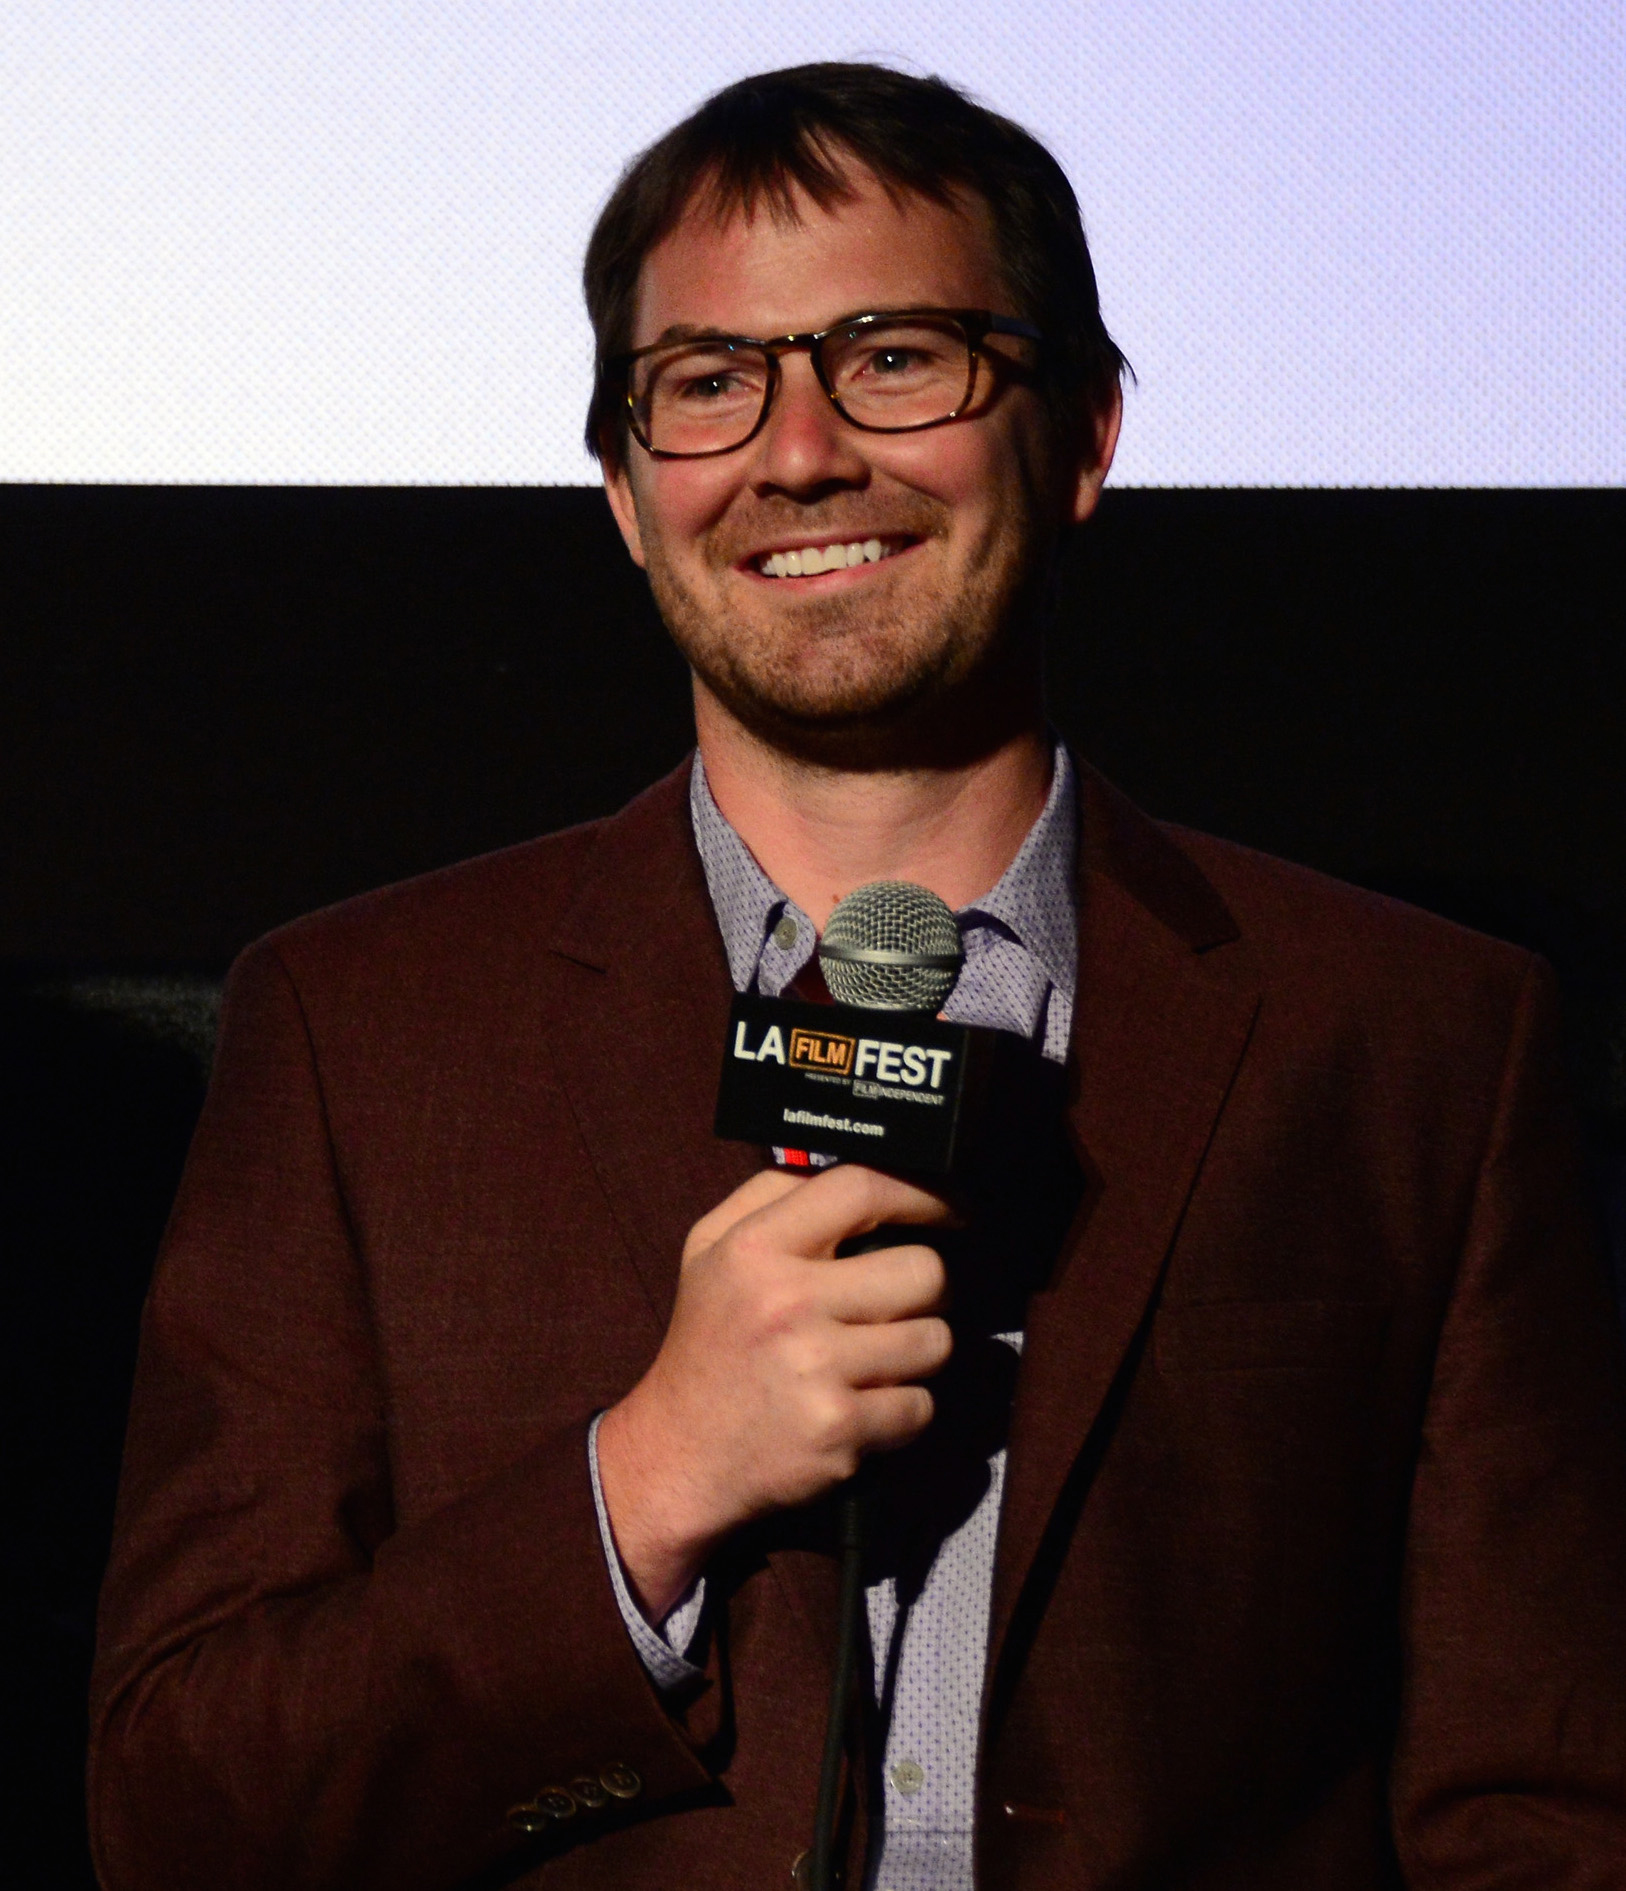 William J Saunders at the Los Angeles Film Festival premiere of Billy Mize and the Bakersfield Sound